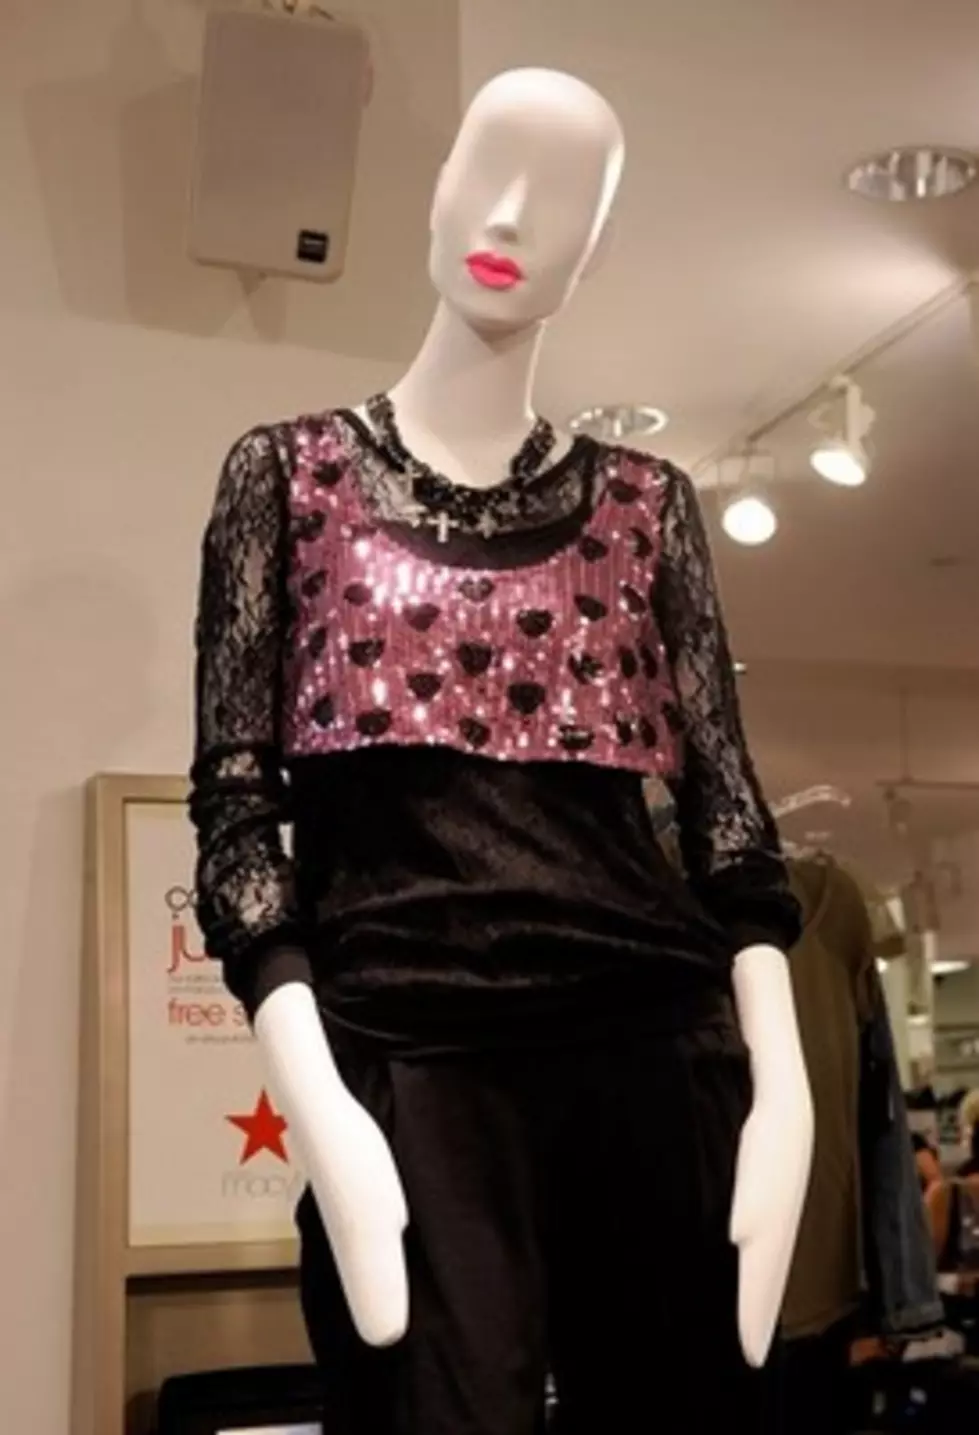 Should Normal Sized Women Mannequins Become The Norm? [VIDEO] [POLL]